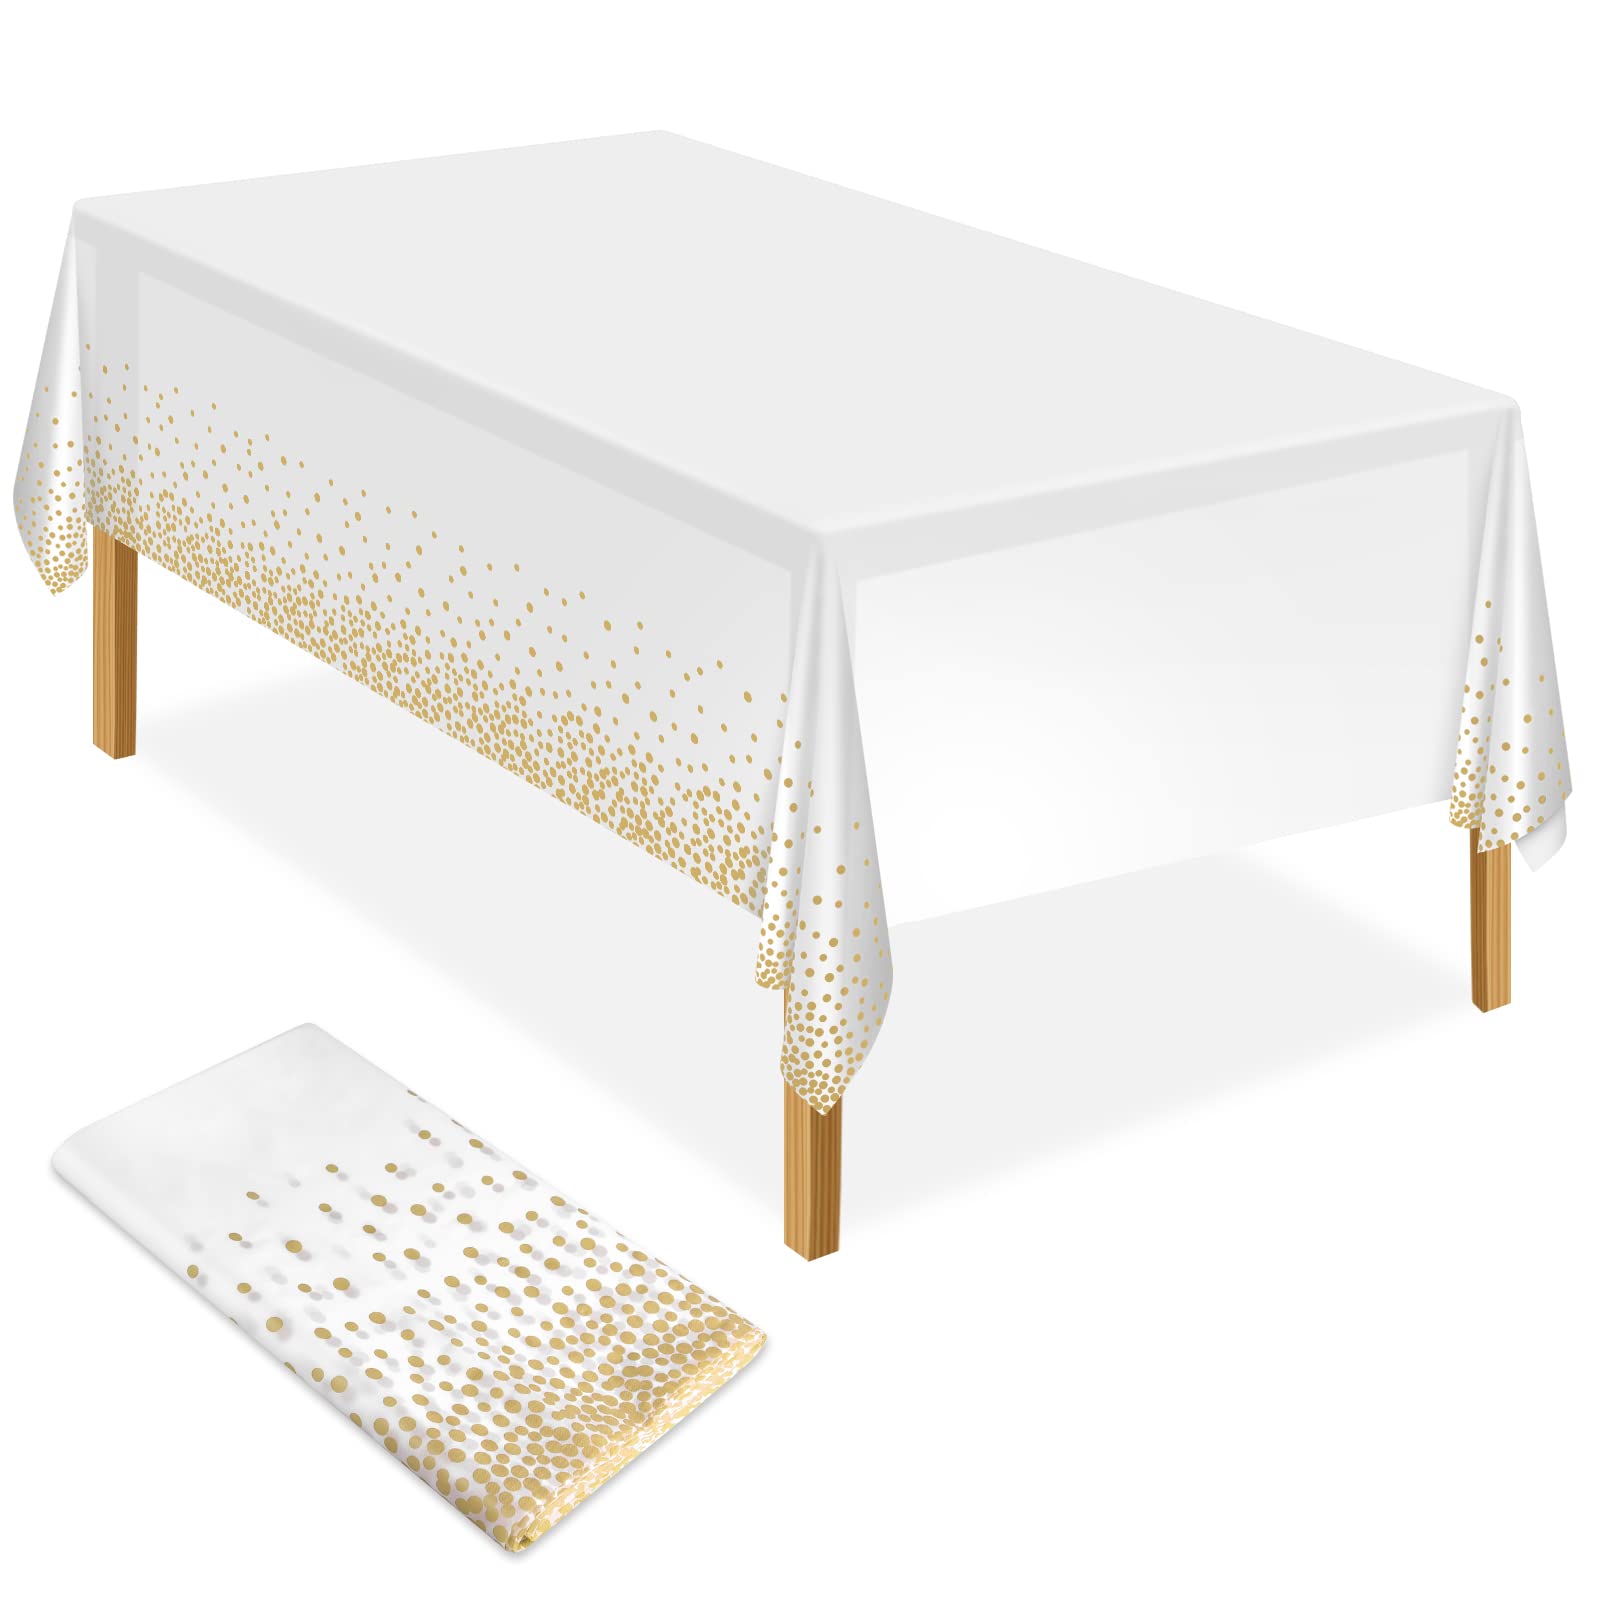 ELECLAND White and Gold Party Tablecloth Plastic Tablecloth 137x274cm Gold Dot Confetti Table Cover Rectangular Party Table Cover for Picnic, Baby Shower, Halloween, Christmas, Birthday Decorations